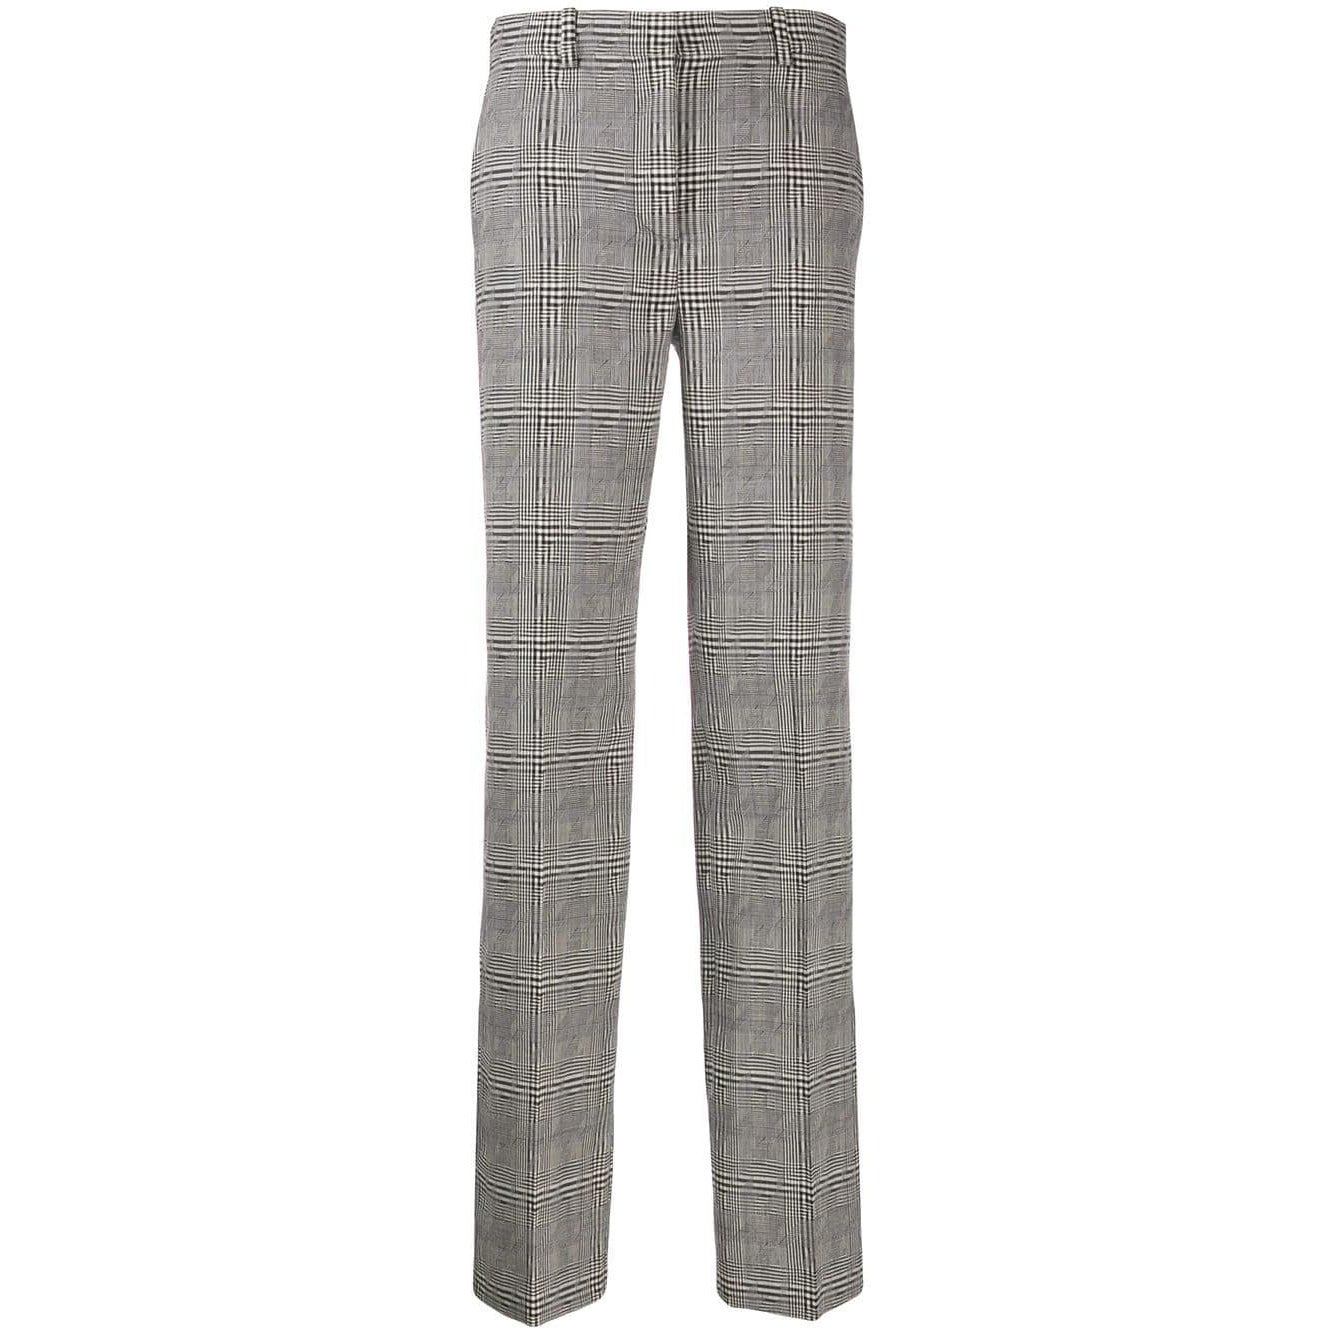 Versace FW19 Runway Grey Wool Hounds Tooth Check Trousers / Pants Size 38 For Sale